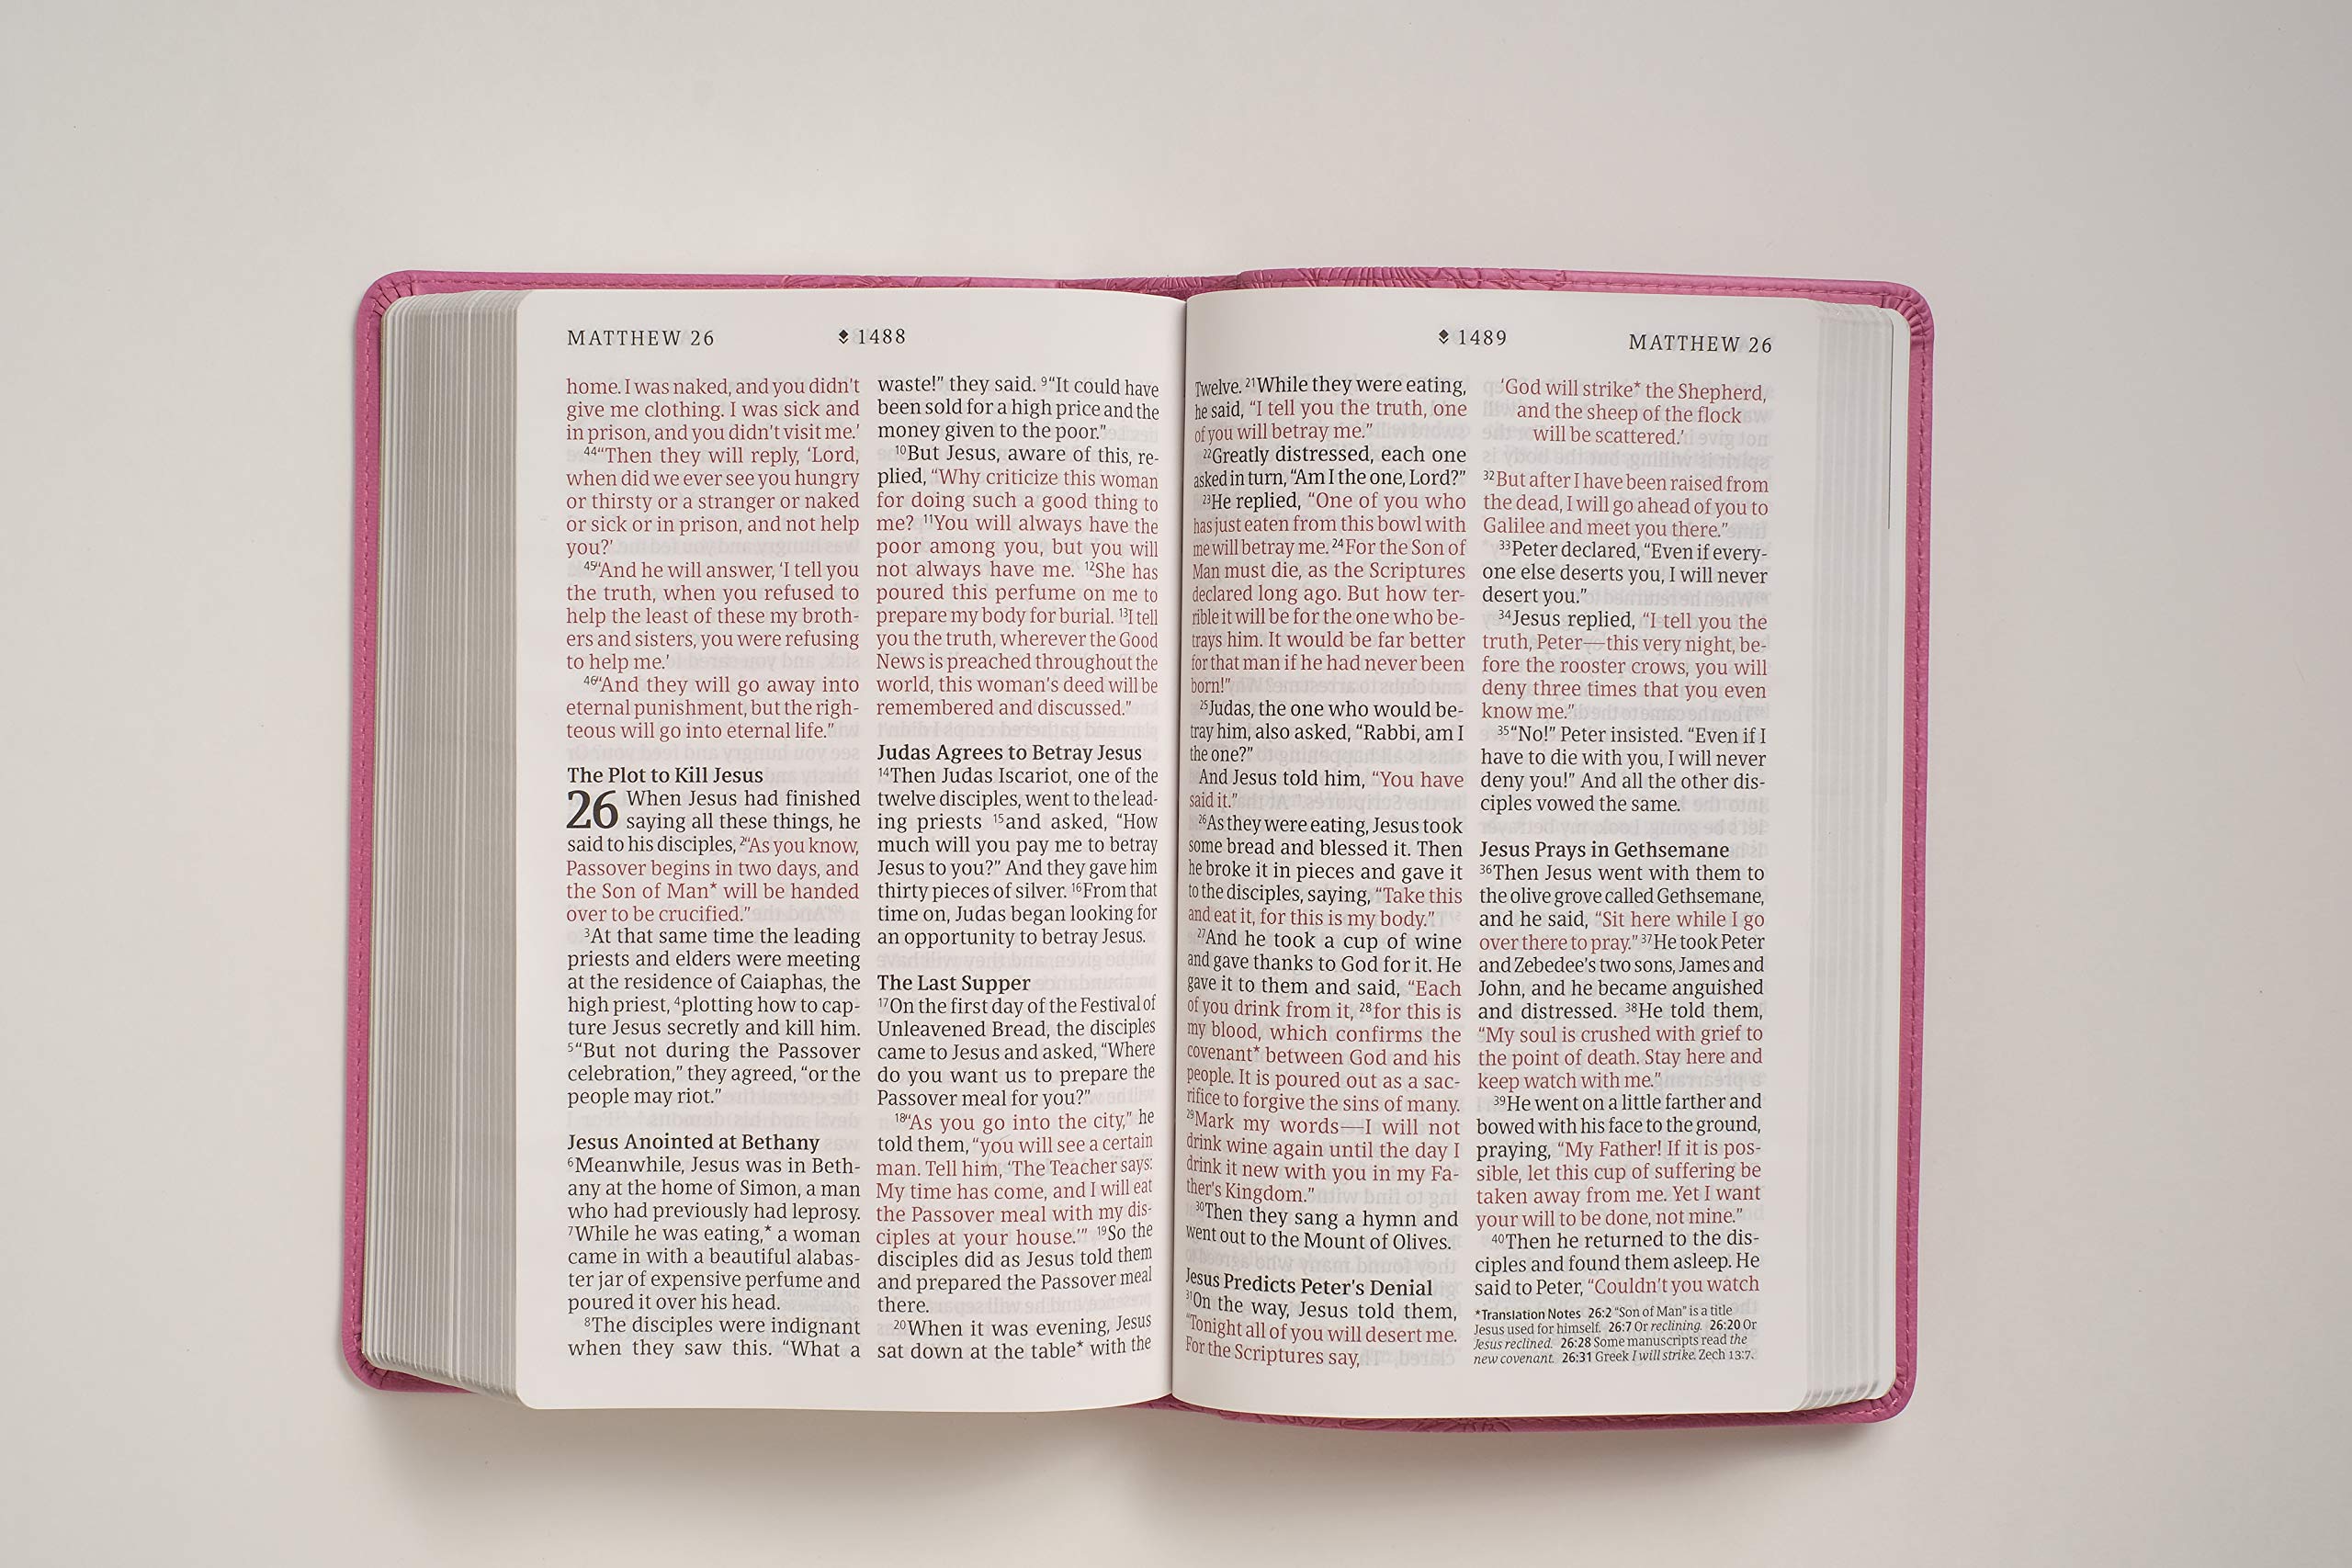 NLT Personal Size Giant Print Holy Bible (Red Letter, LeatherLike, Peony Pink): Includes Free Access to the Filament Bible App Delivering Study Notes, Devotionals, Worship Music, and Video